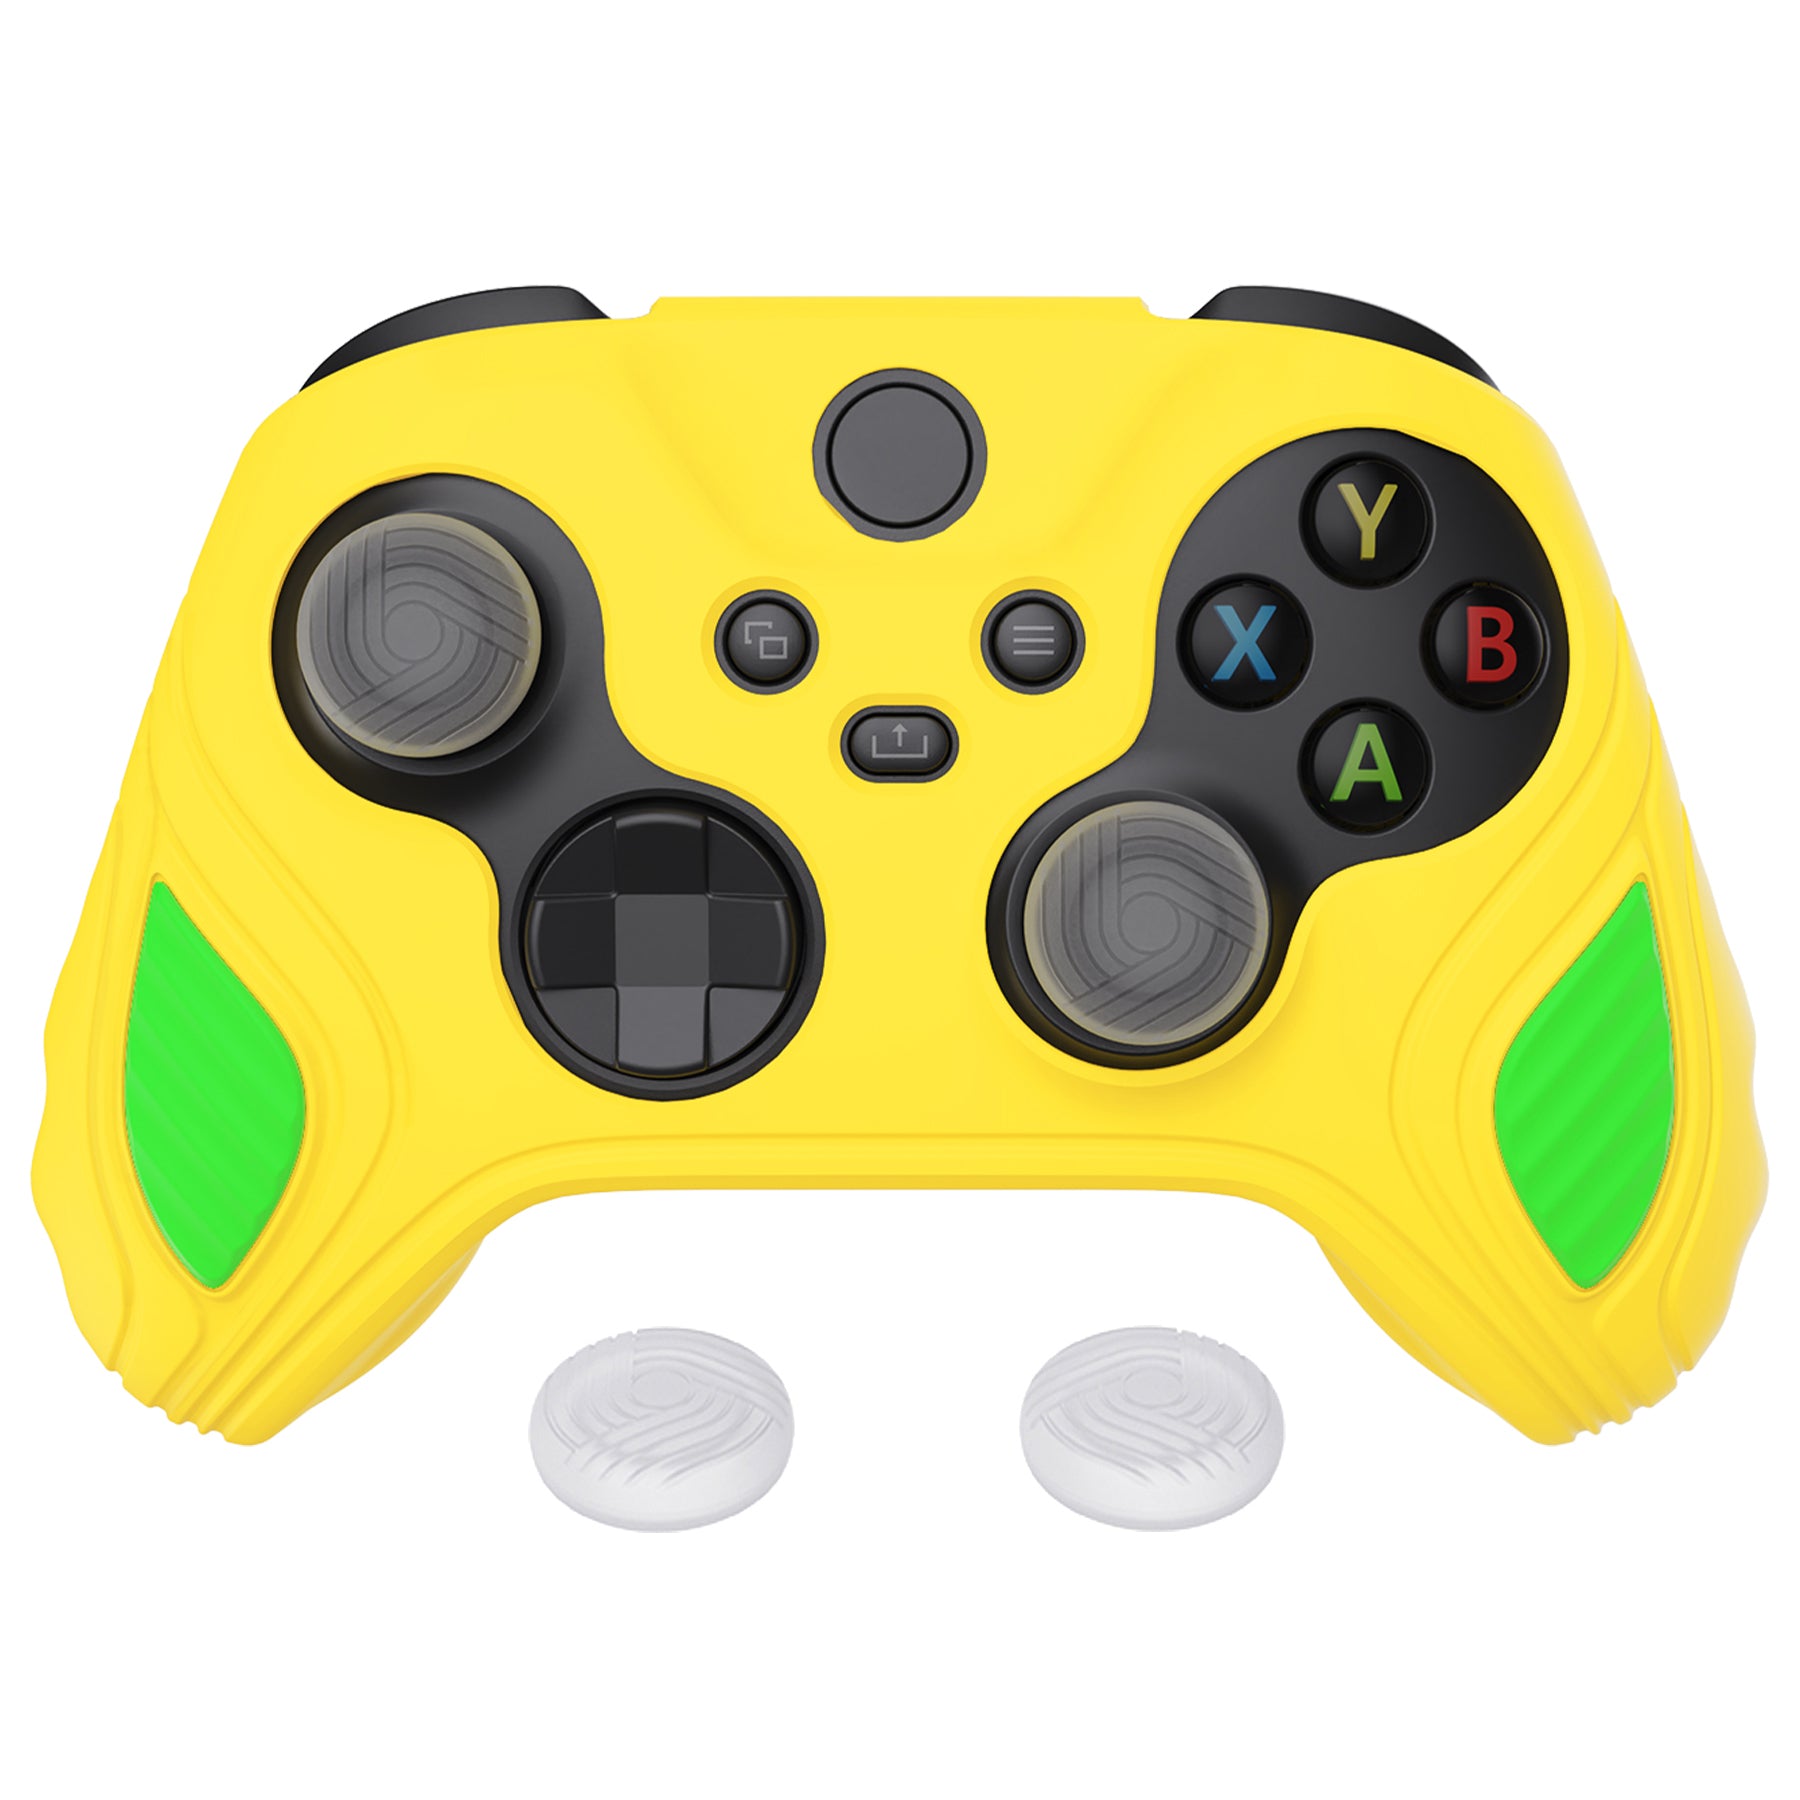 PlayVital Scorpion Edition Anti-Slip Silicone Case Cover for Xbox Series X/S Controller, Soft Rubber Case for Xbox Series X/S Controller with Thumb Grip Caps - Legend Yellow & Green -SPX3013 PlayVital